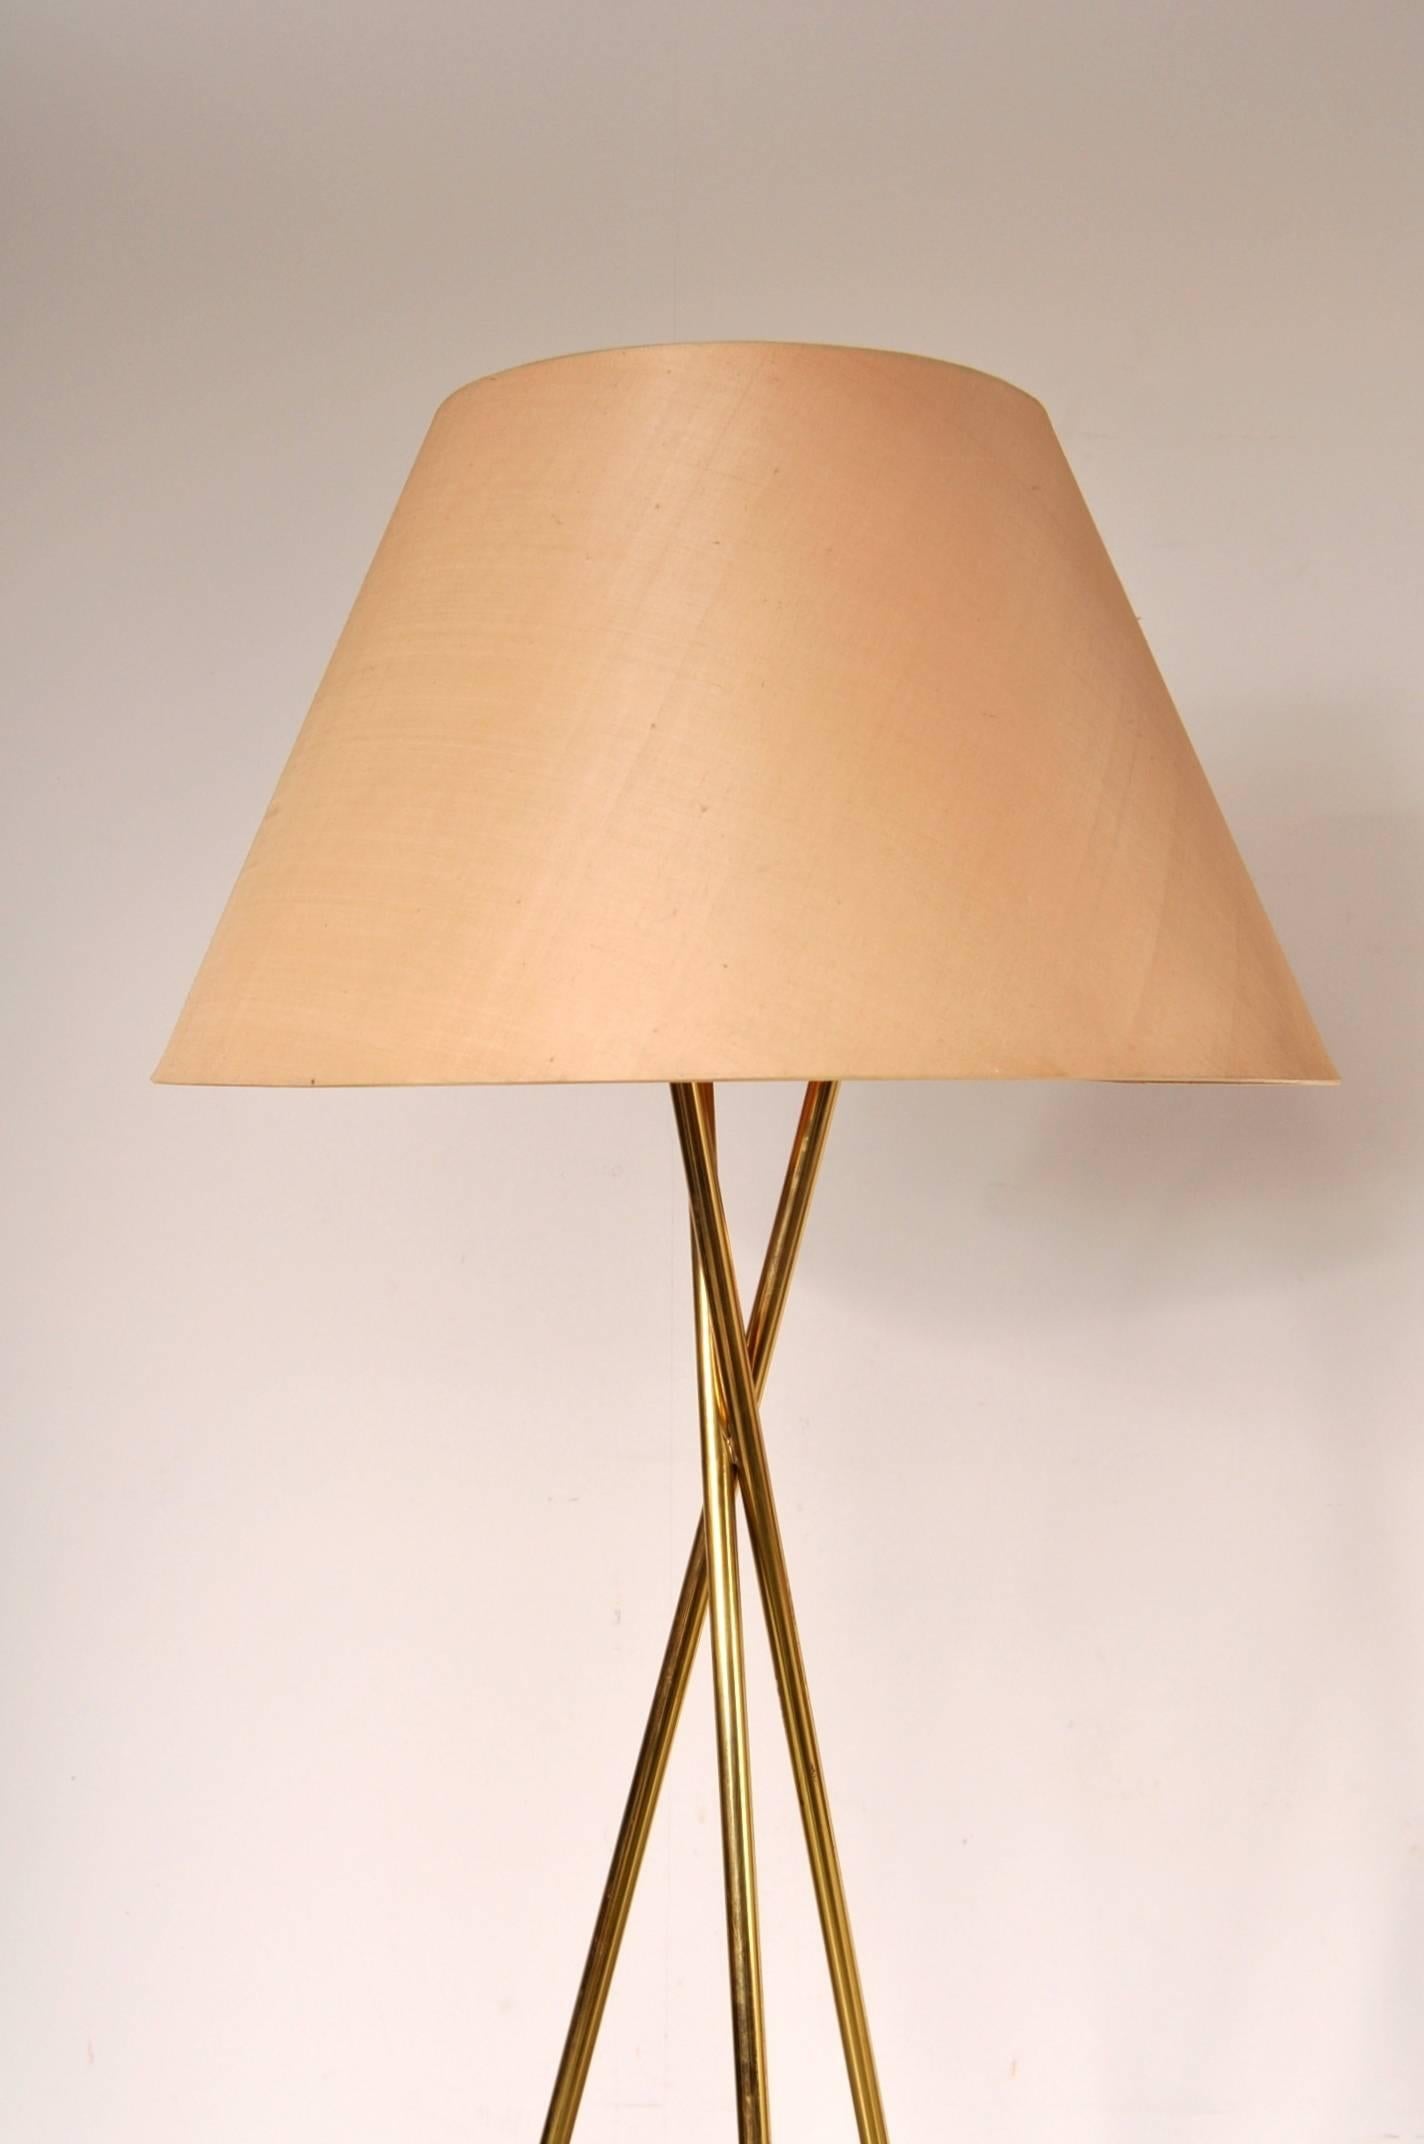 Luxurious set of two floor lamps, manufactured in the United States, circa 1960.

These beautiful lamps would make the absolute eye-catchers in any interior. The tripod legs are made from the highest quality brass and have a very nice shape,